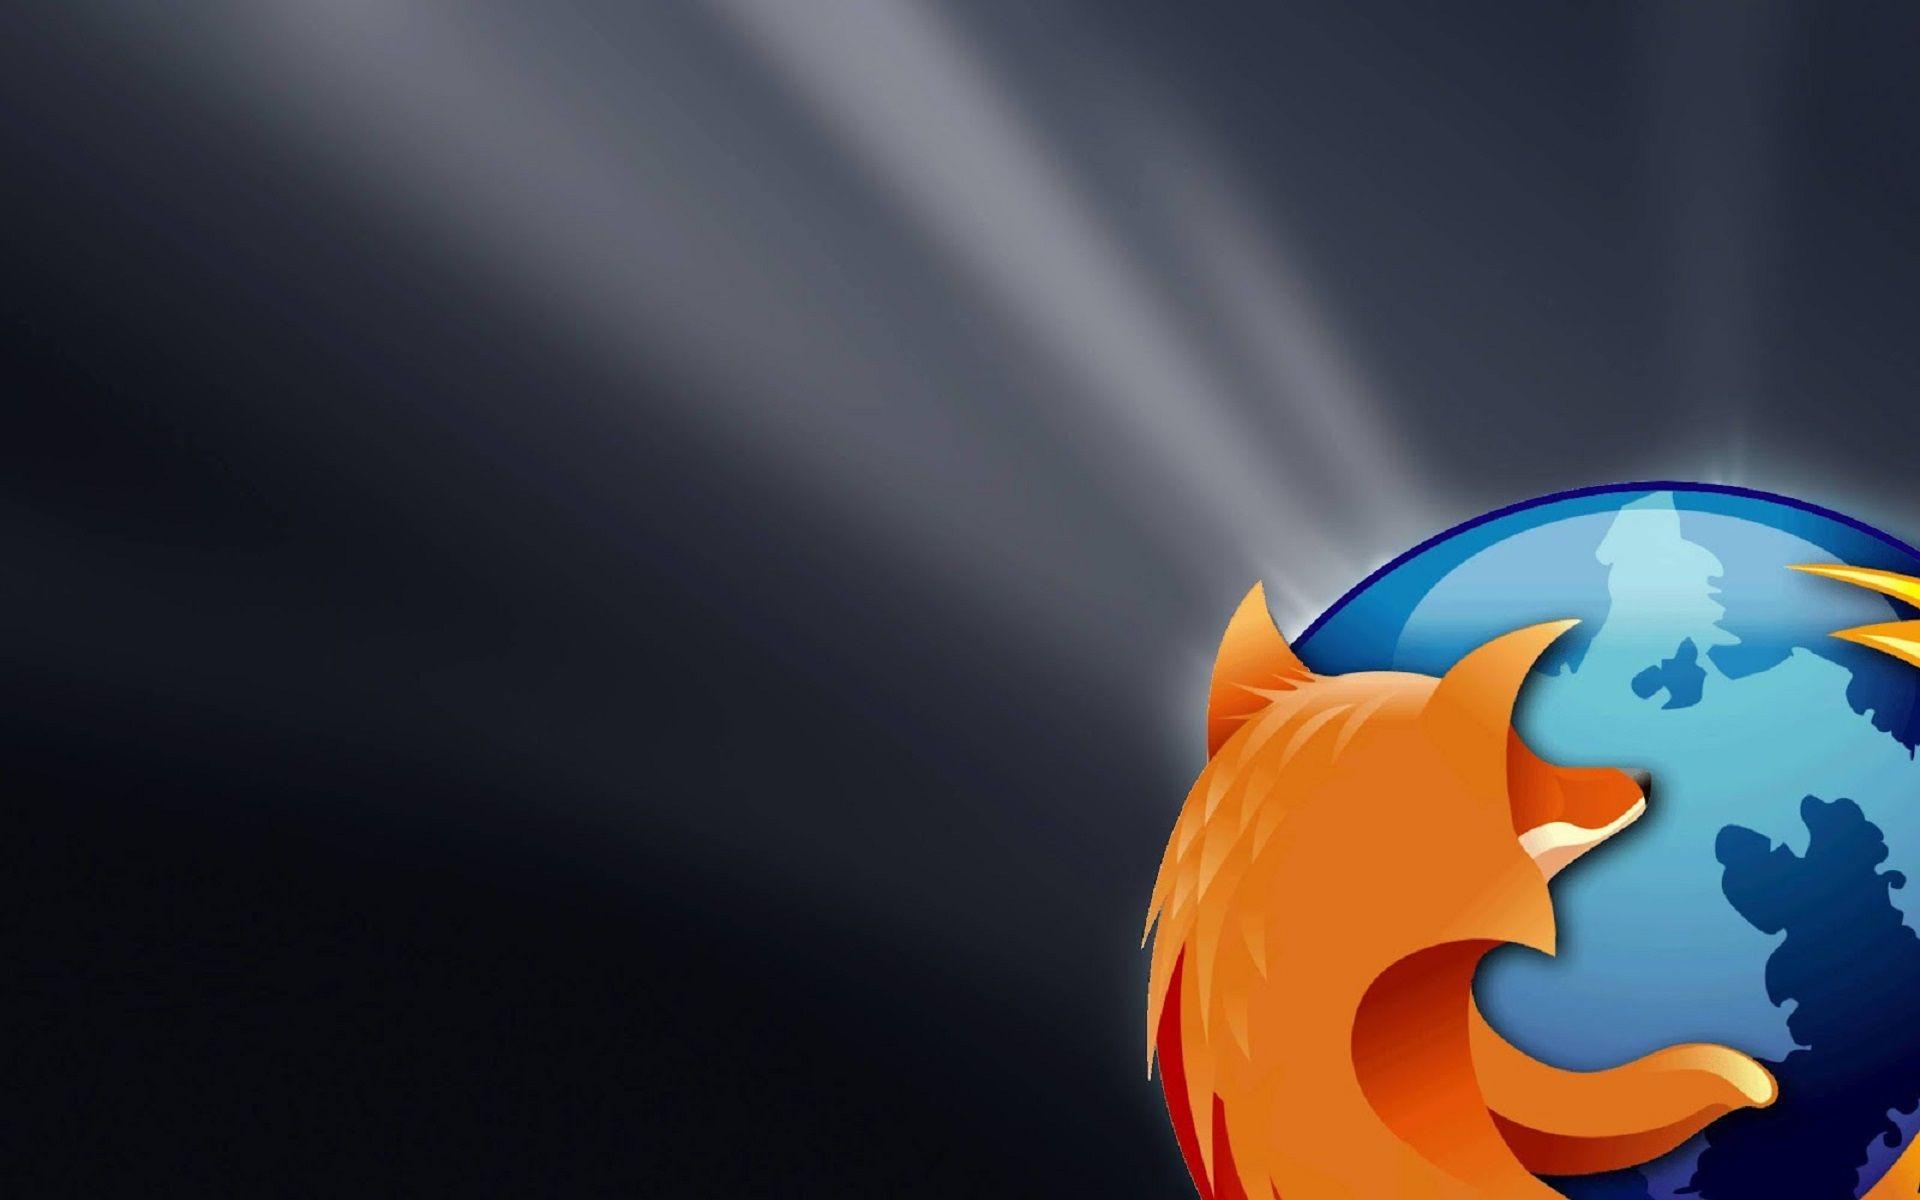 Firefox on the penis